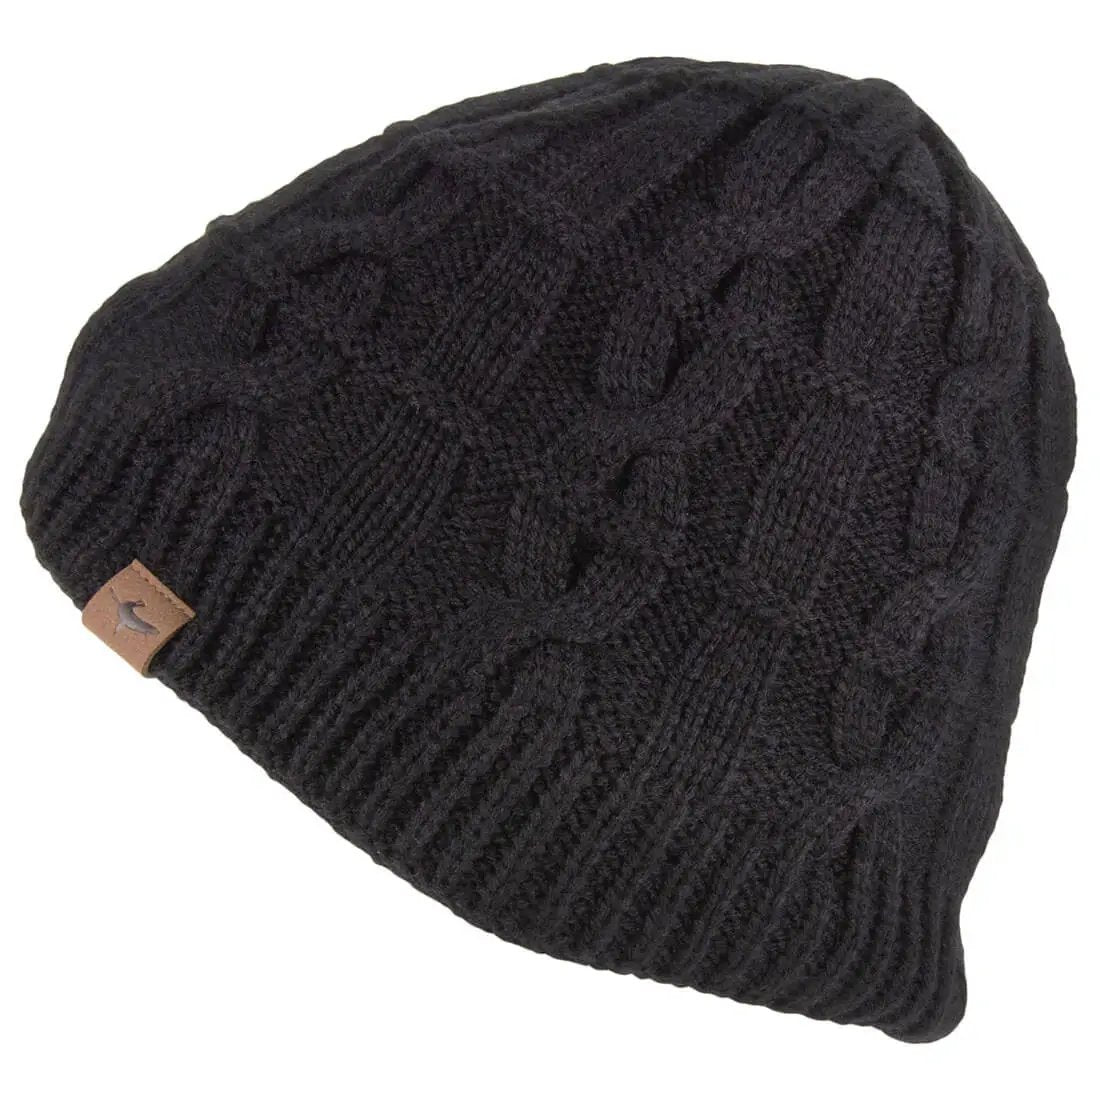 Sealskinz Waterproof Cold Weather Cable Knit Beanie - John Bull Clothing